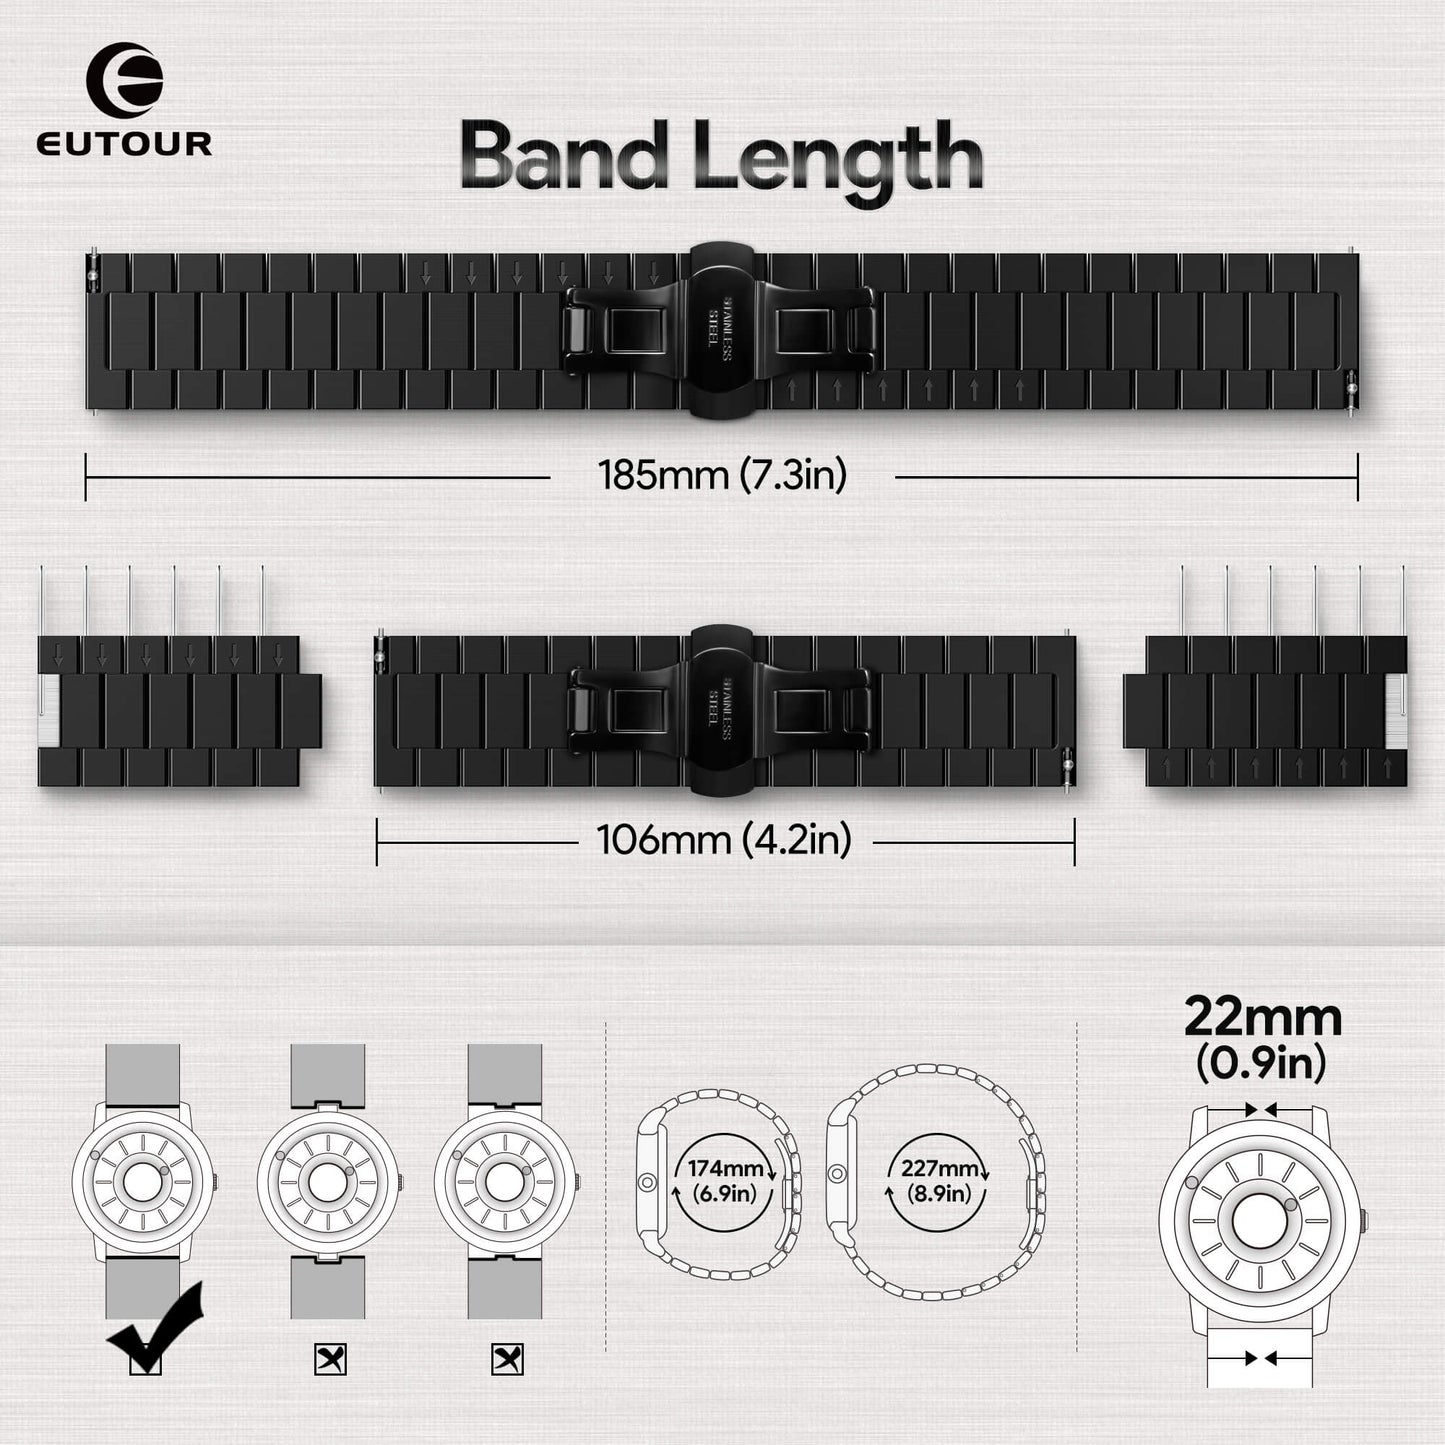 EUTOUR 22mm Stainless Steel Expansion Watch Band for Men